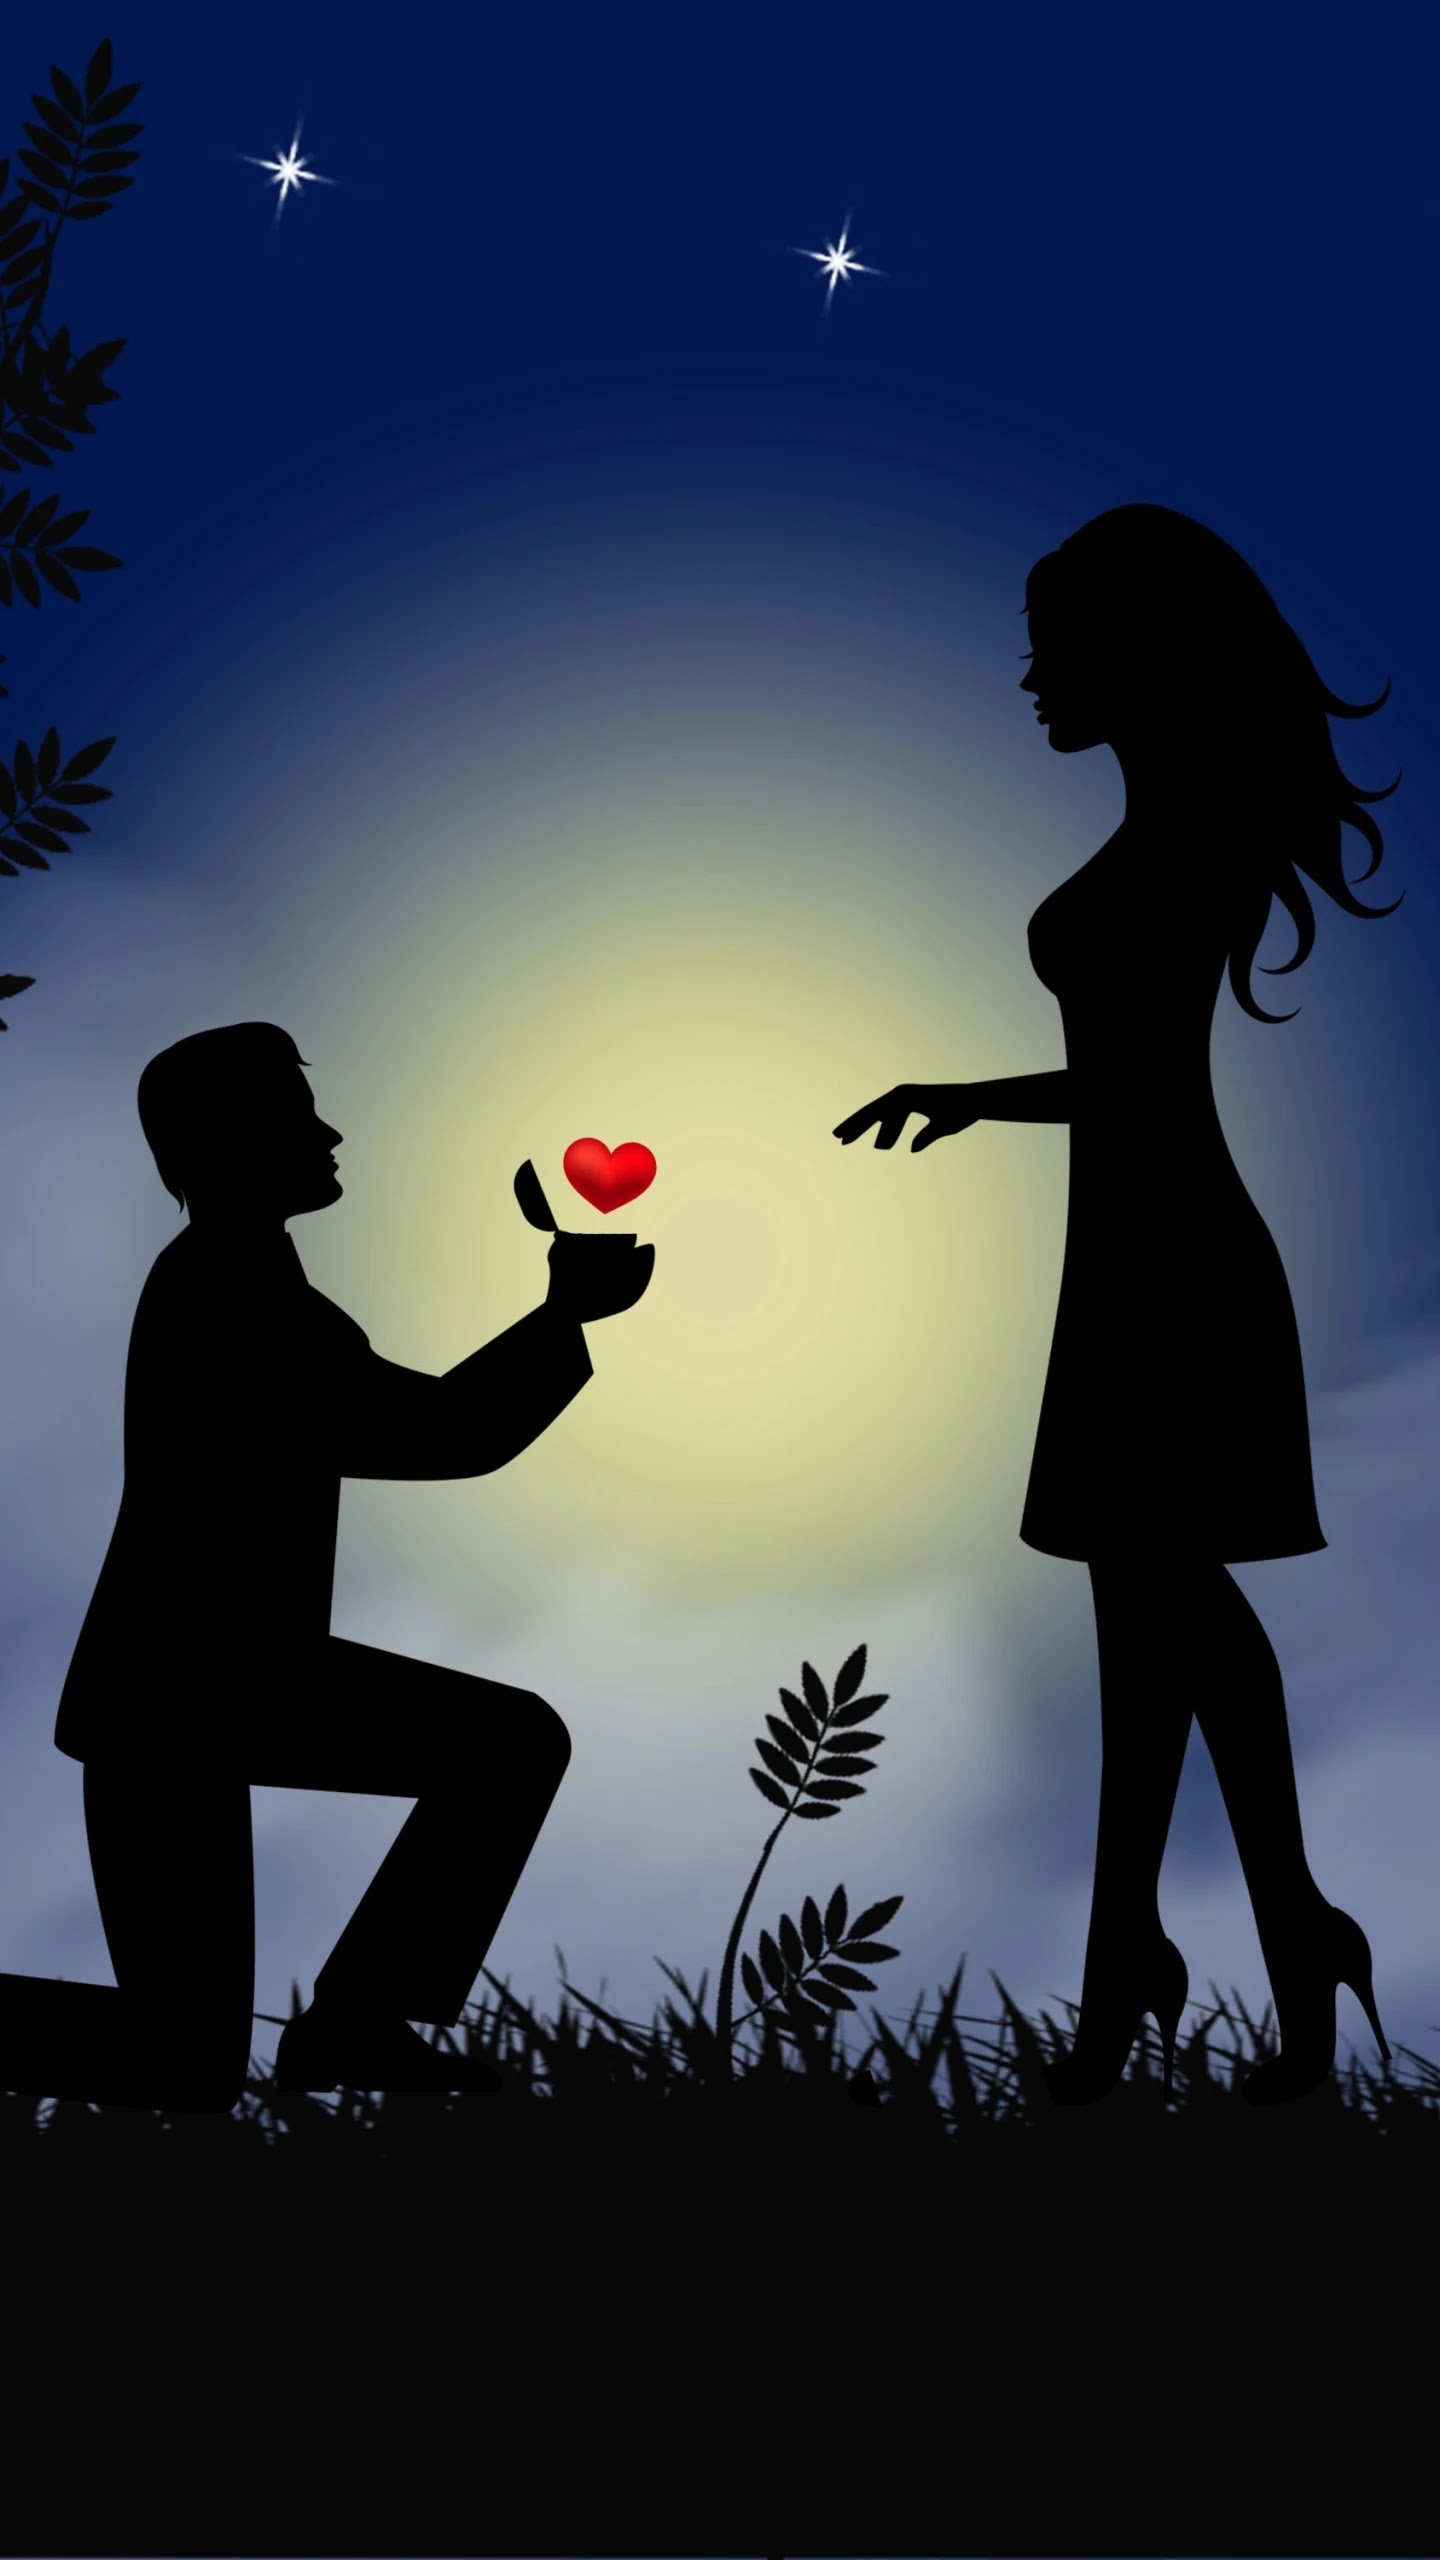 Will You Marry Me ? Phone wallpaper - Artistic - Love - Romantic - Silhouette - People - Couple - ponselwallpaper